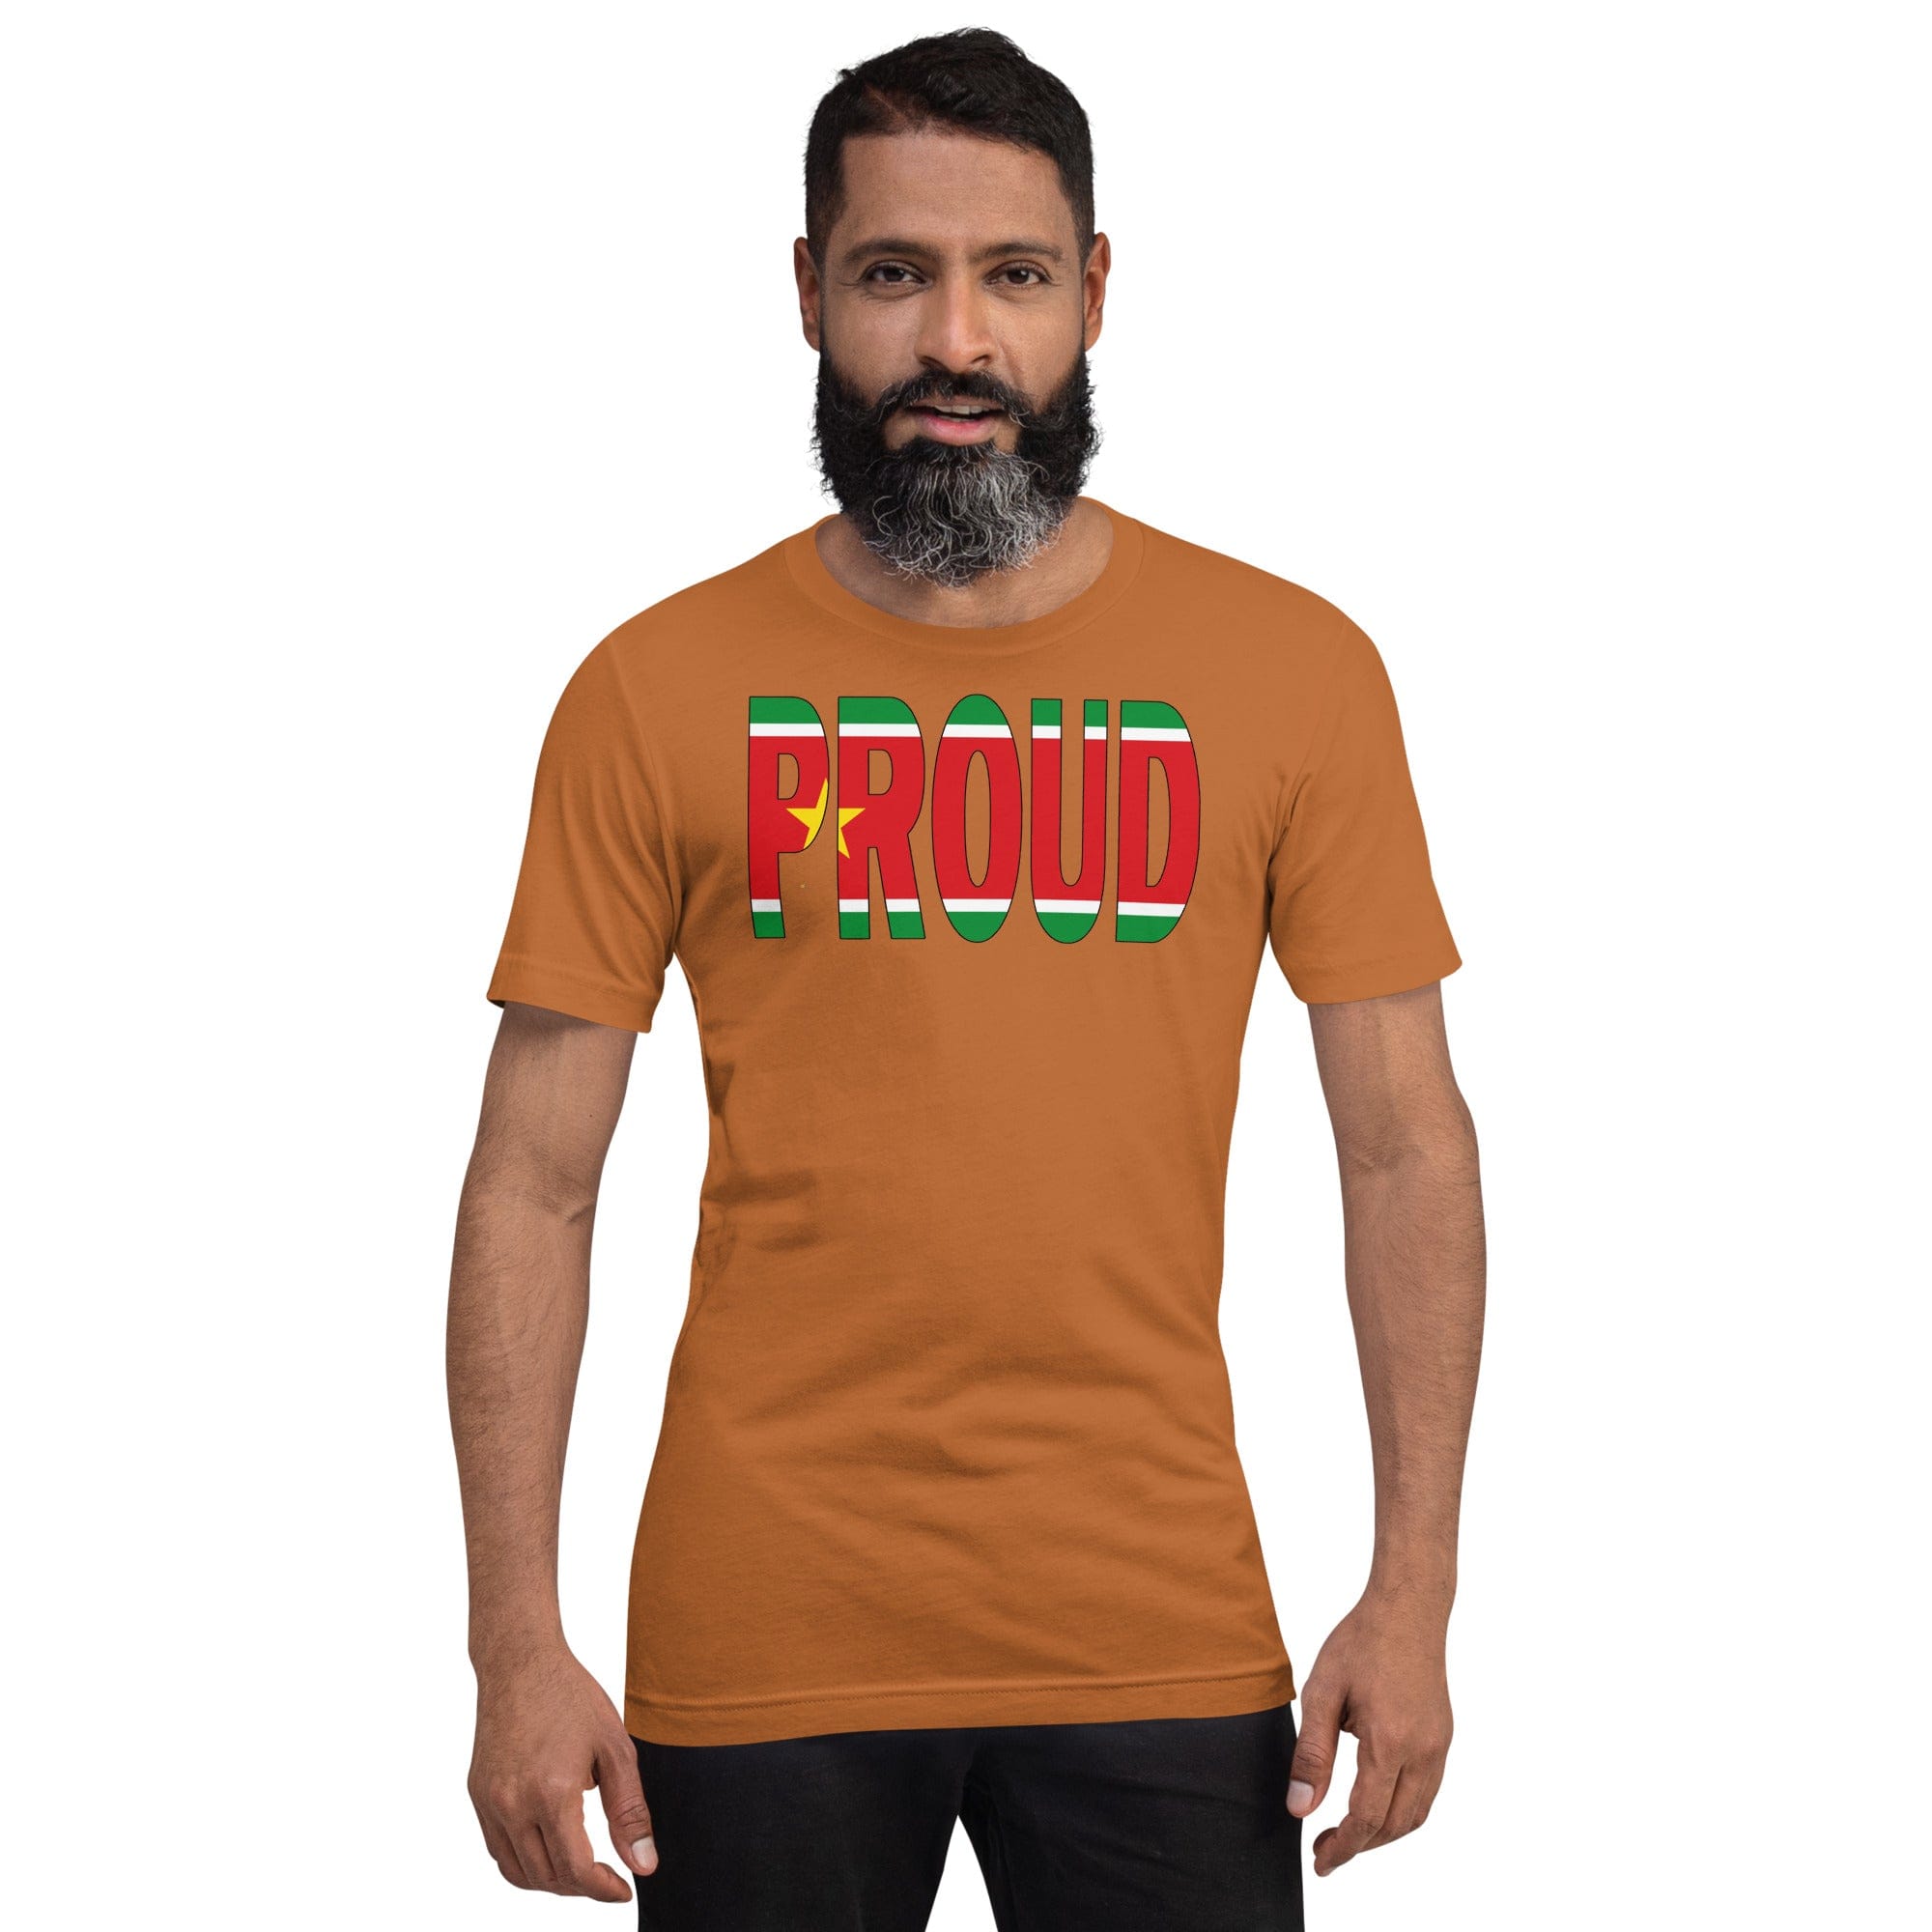 Guadeloupe Flag designed to spell Proud on a brown color t-shirt worn by a black man.